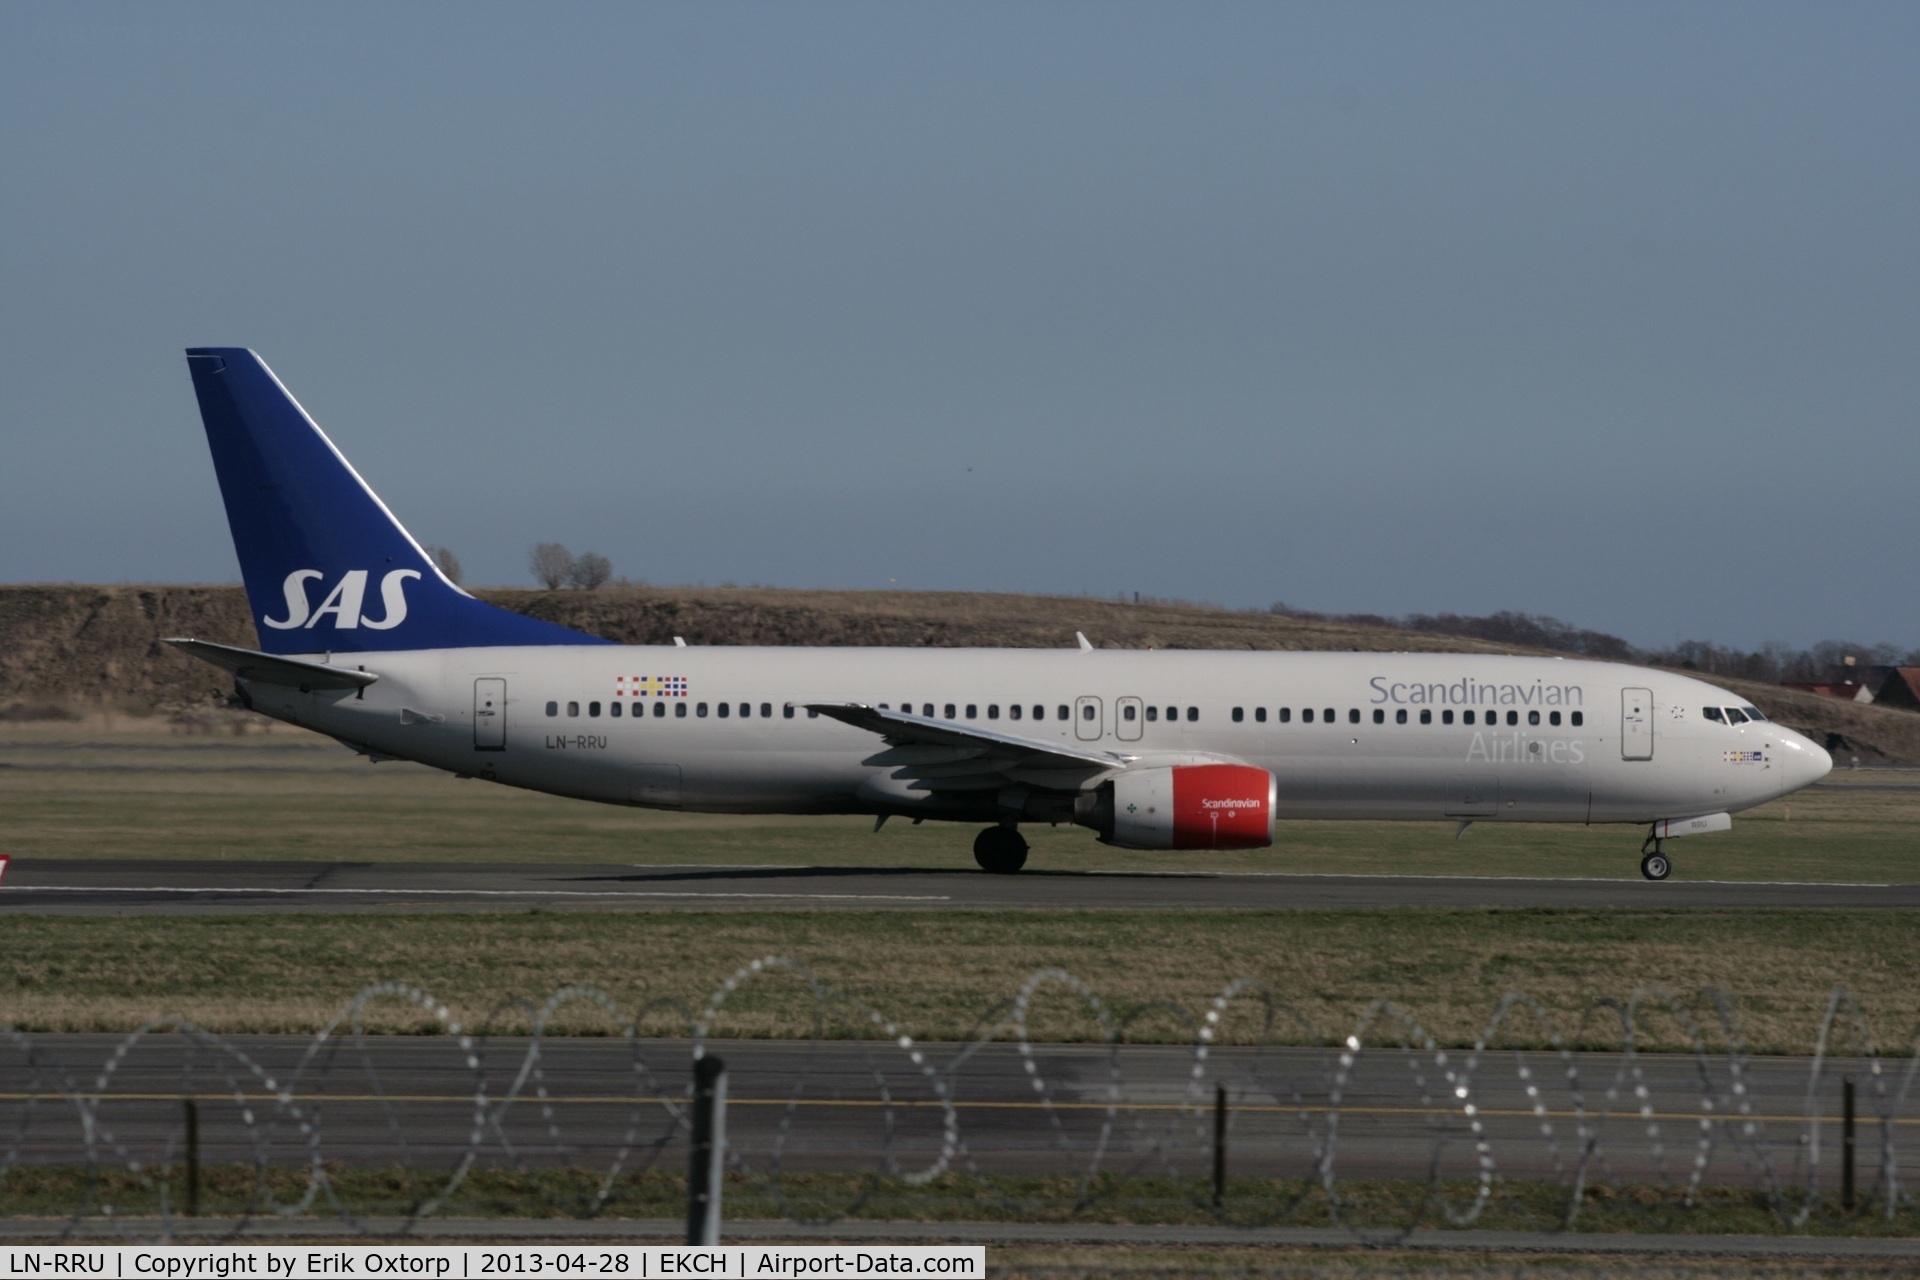 LN-RRU, 2002 Boeing 737-883 C/N 28327, Now with the three flags